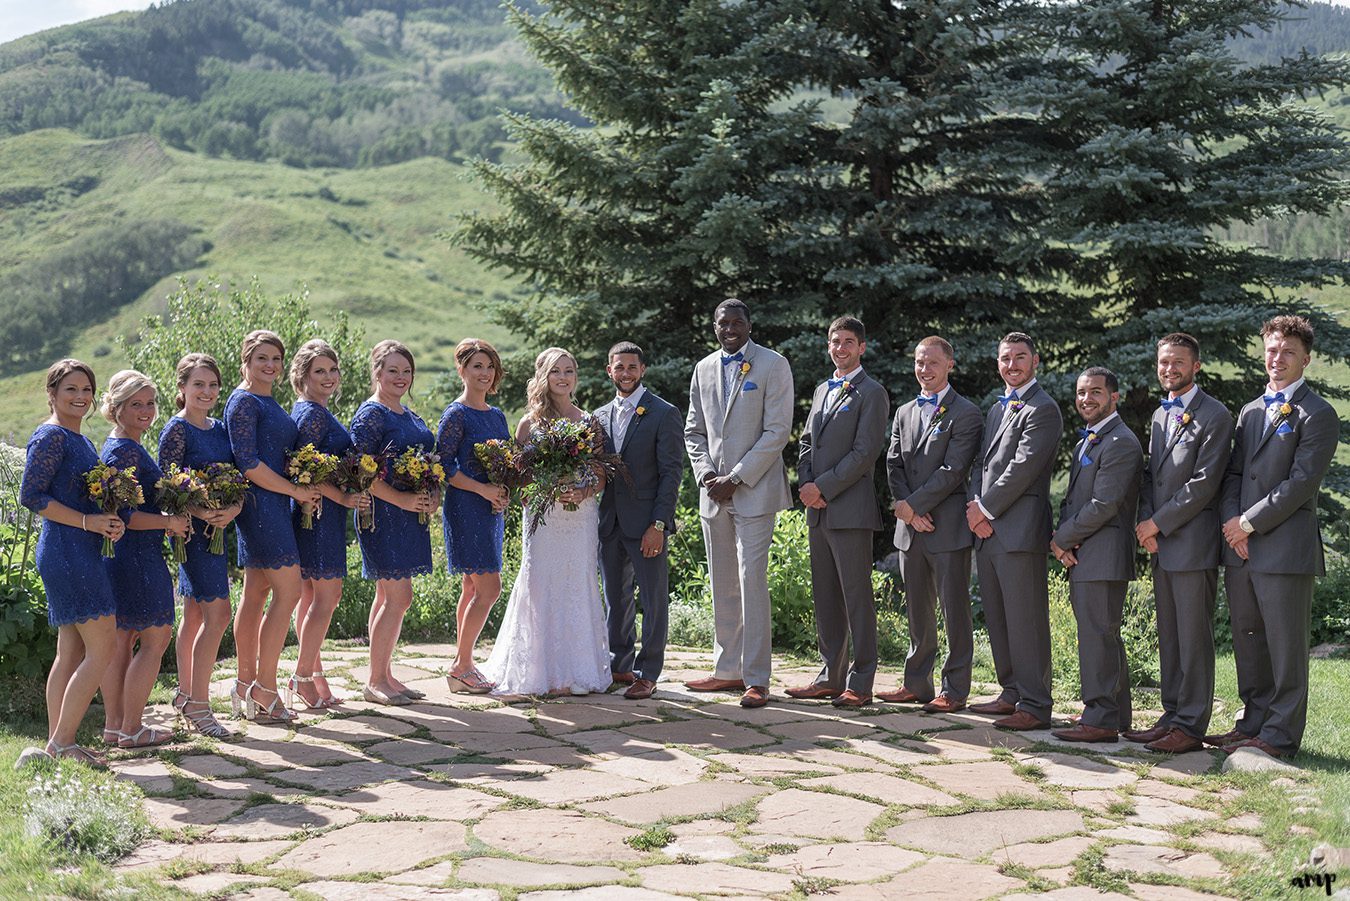 Full bridal party at the Crested Butte Mountain Wedding Garden